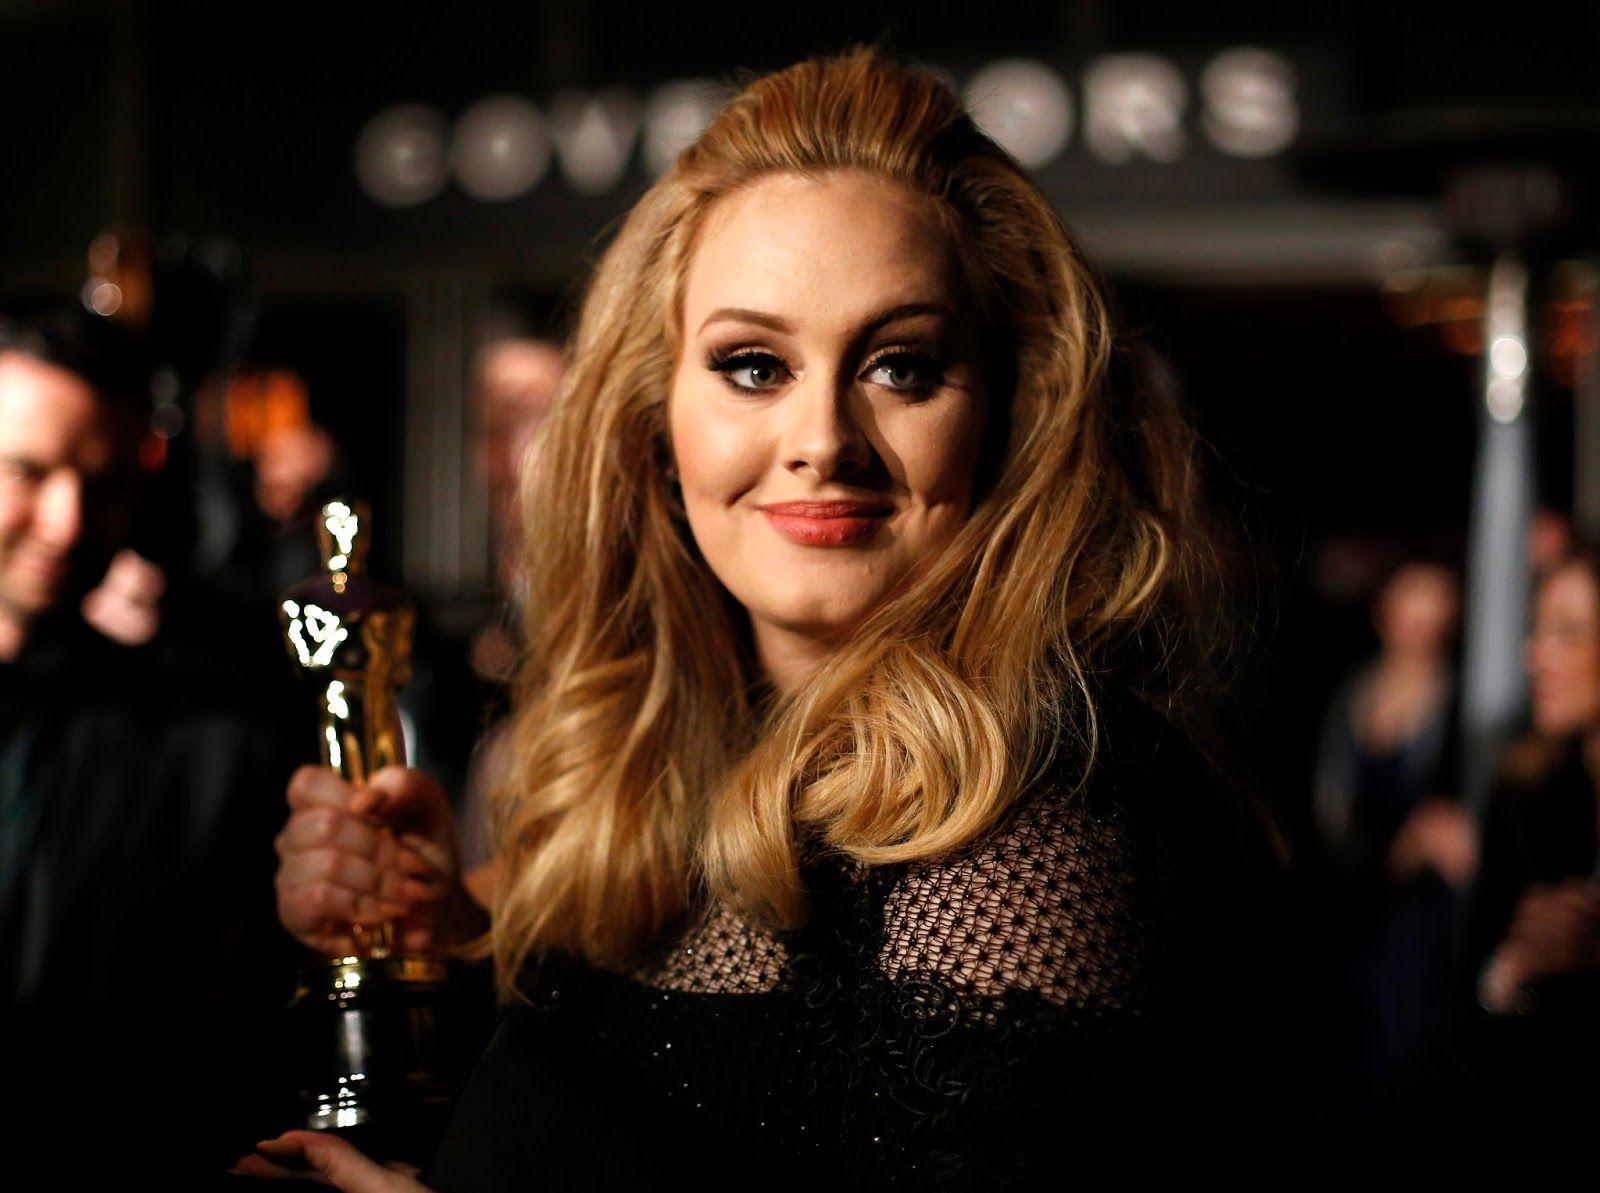 Best 33 Adele HD Wallpaper, Image And Picture Free Download